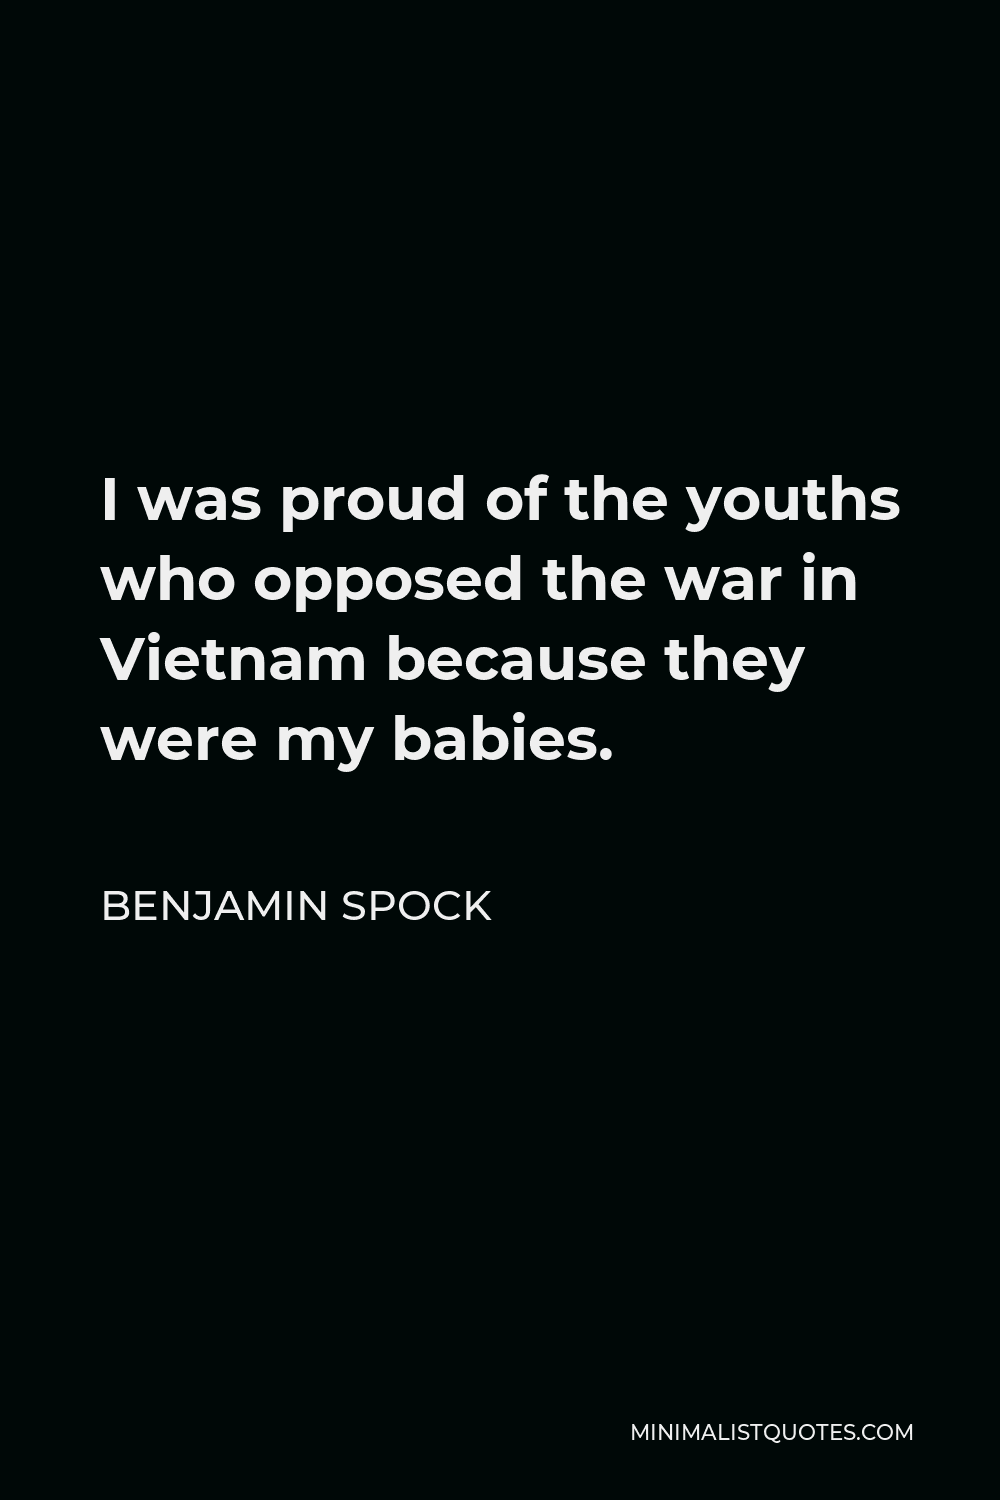 Benjamin Spock Quote - I was proud of the youths who opposed the war in Vietnam because they were my babies.